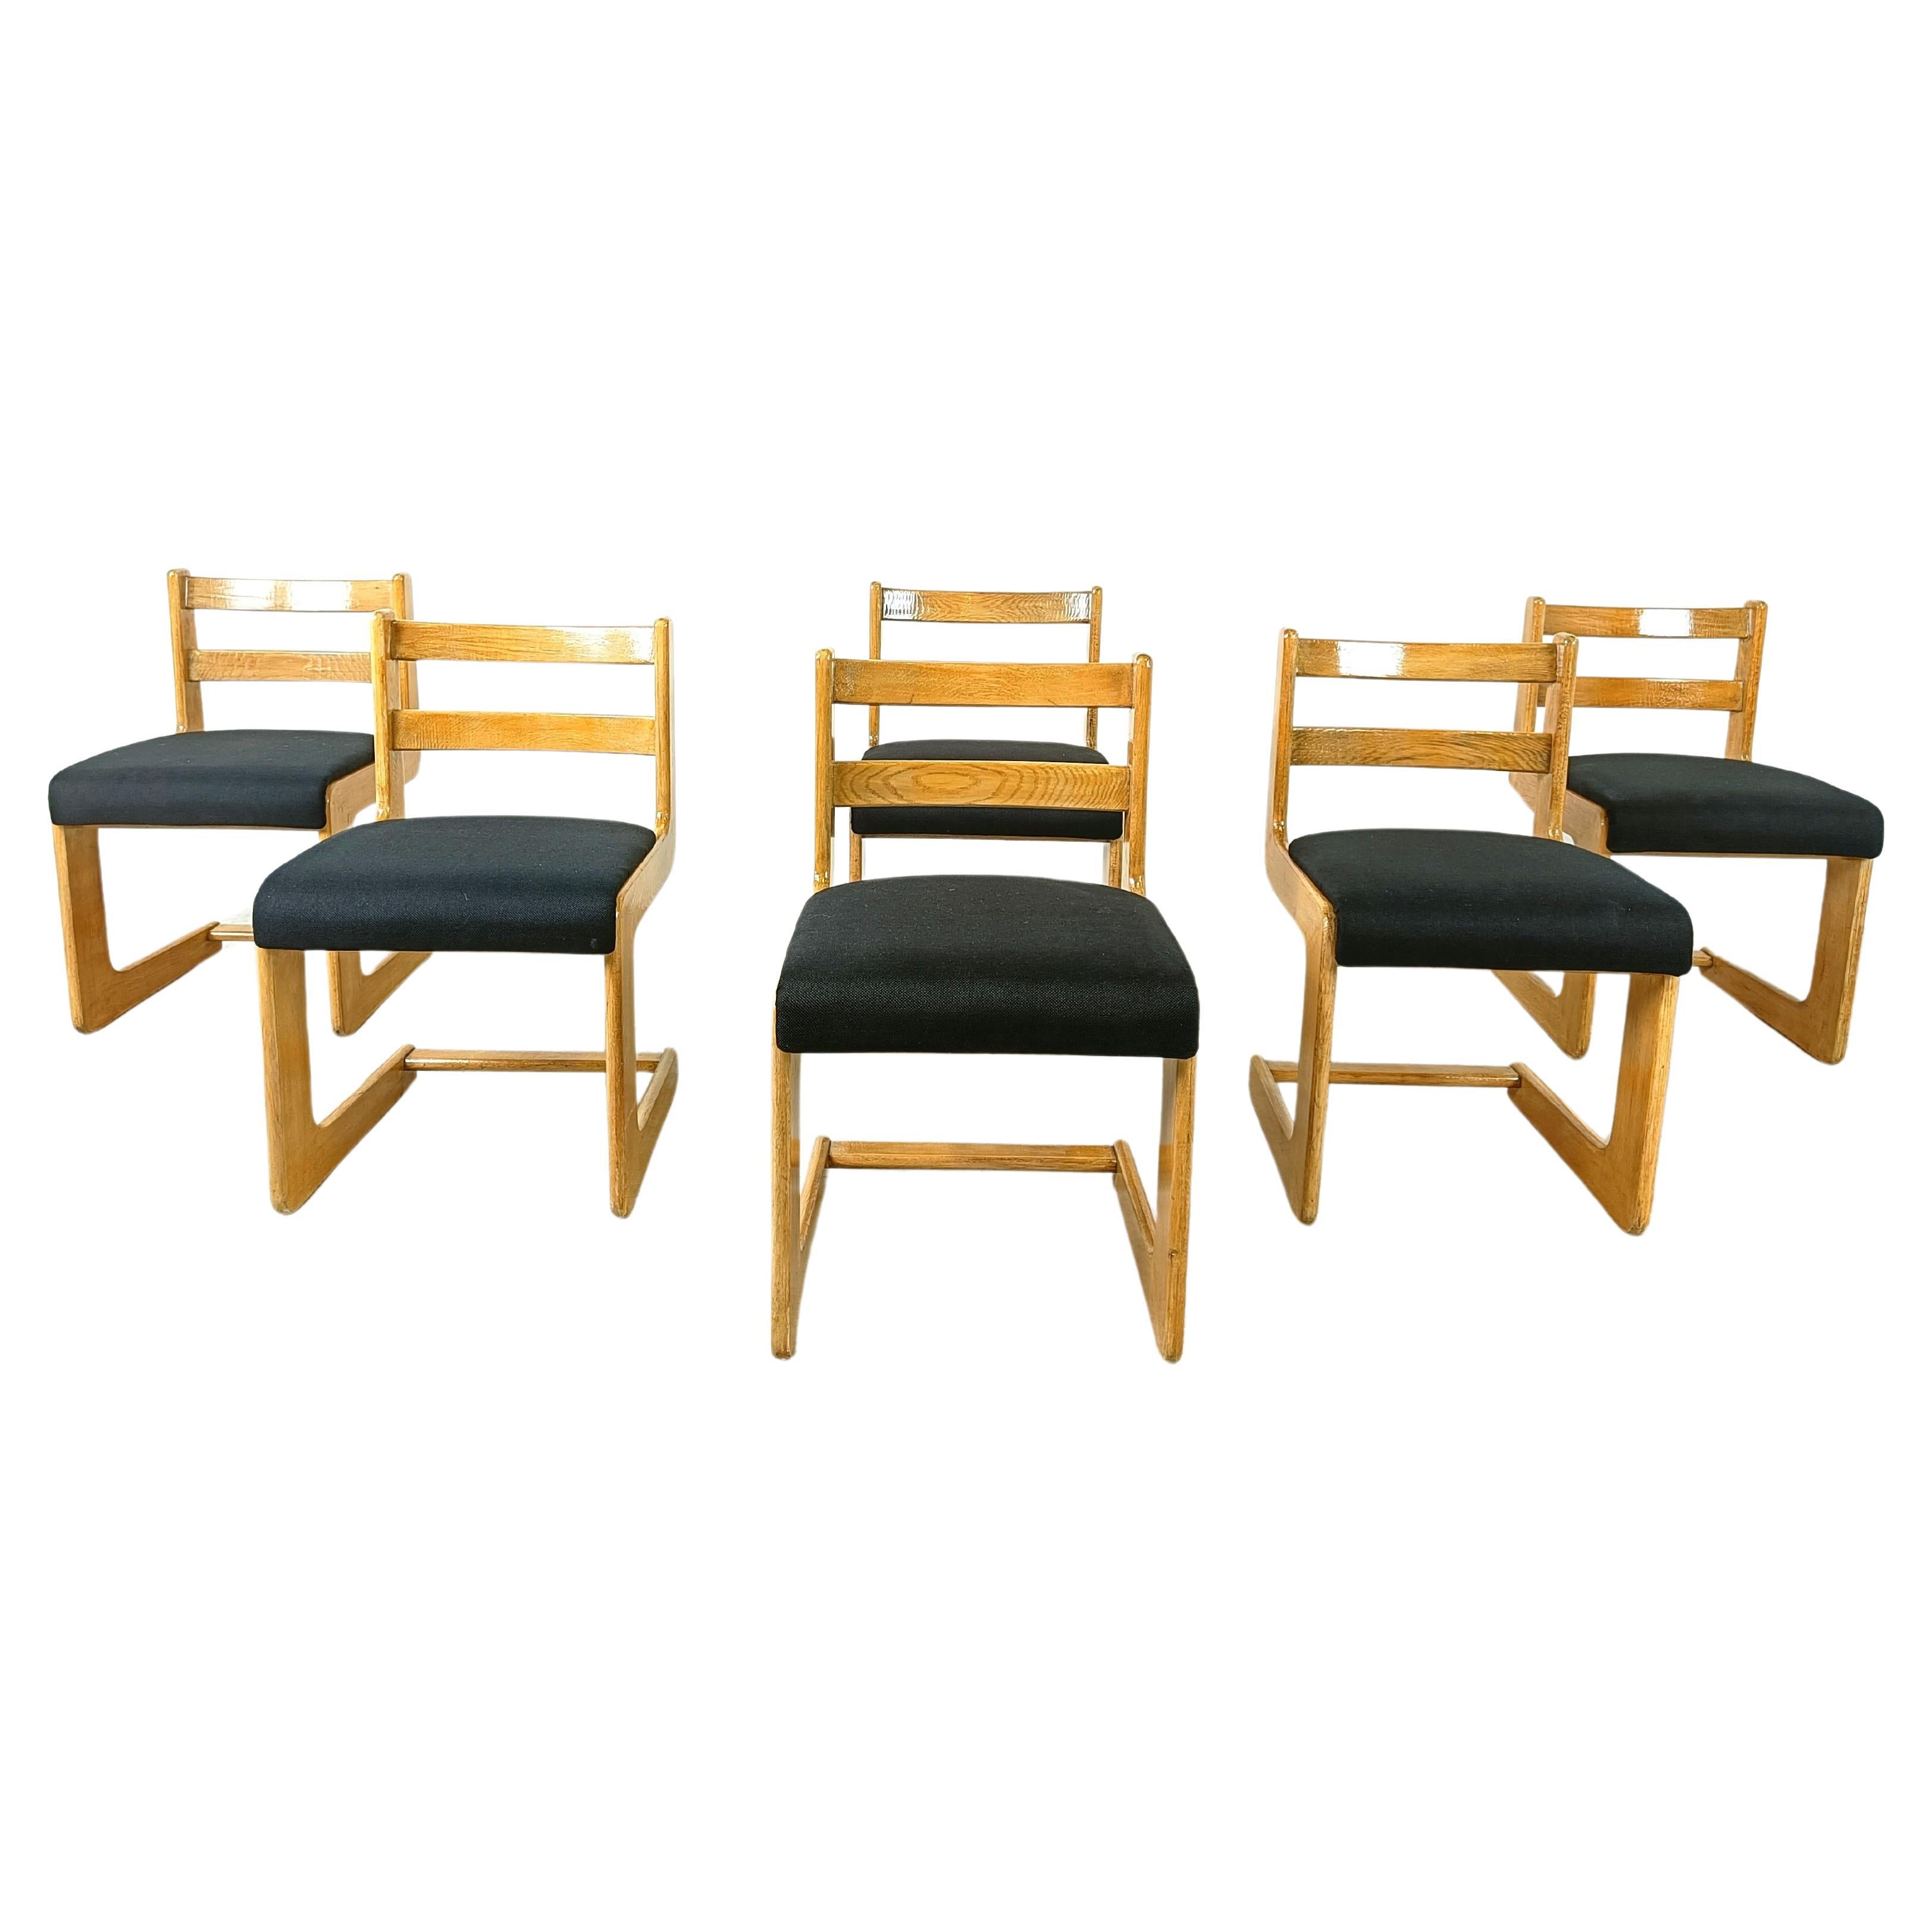 Vintage cantilever chairs by Casala, 1970s